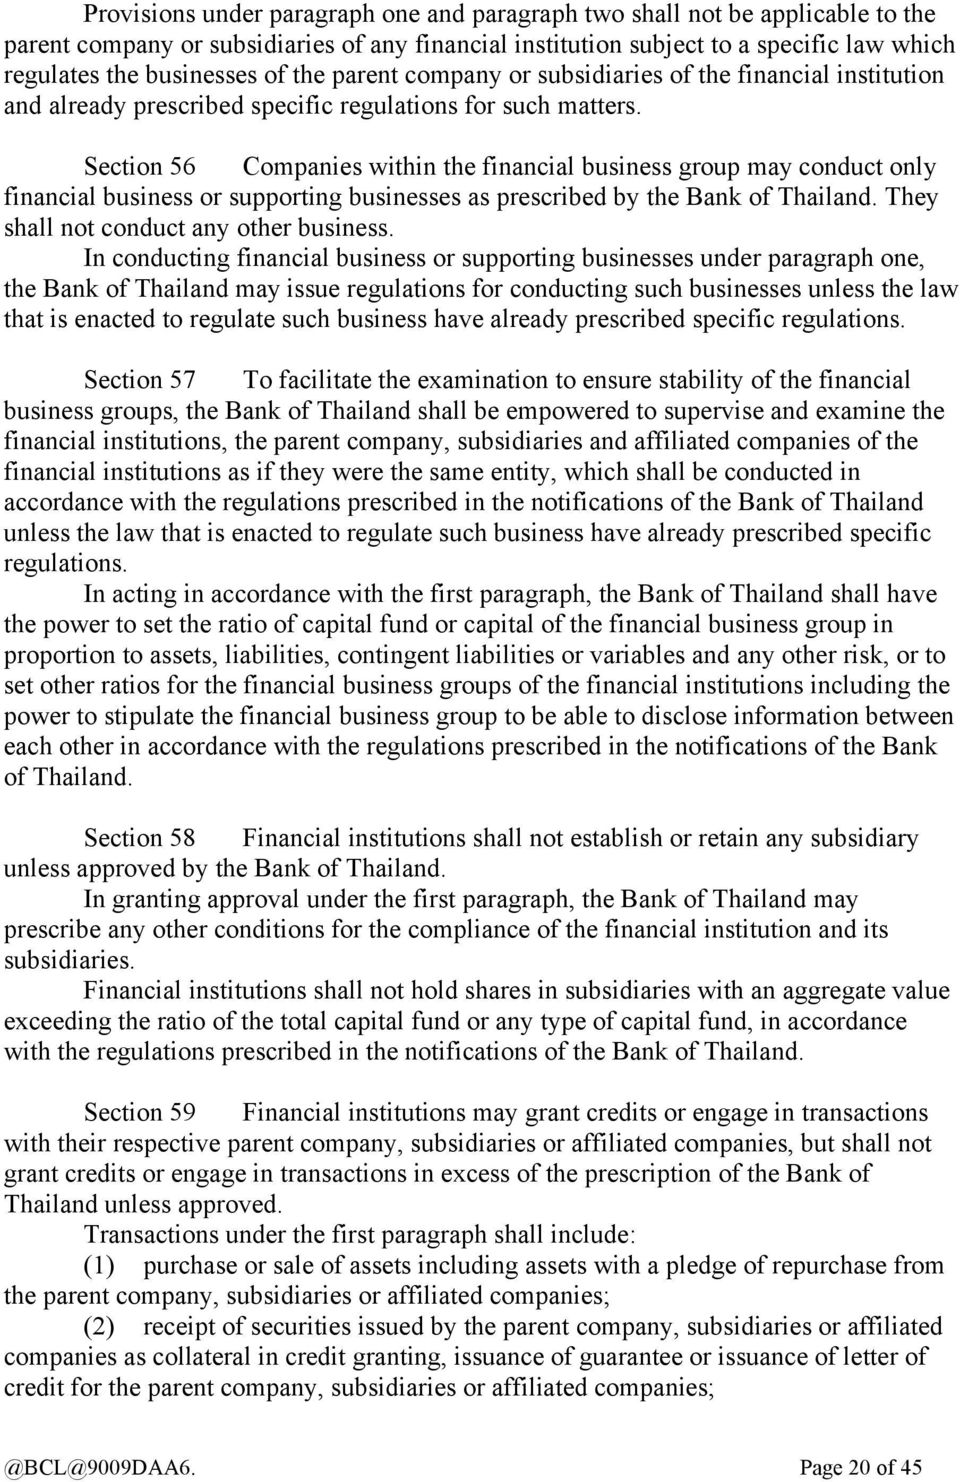 Section 56 Companies within the financial business group may conduct only financial business or supporting businesses as prescribed by the Bank of Thailand. They shall not conduct any other business.